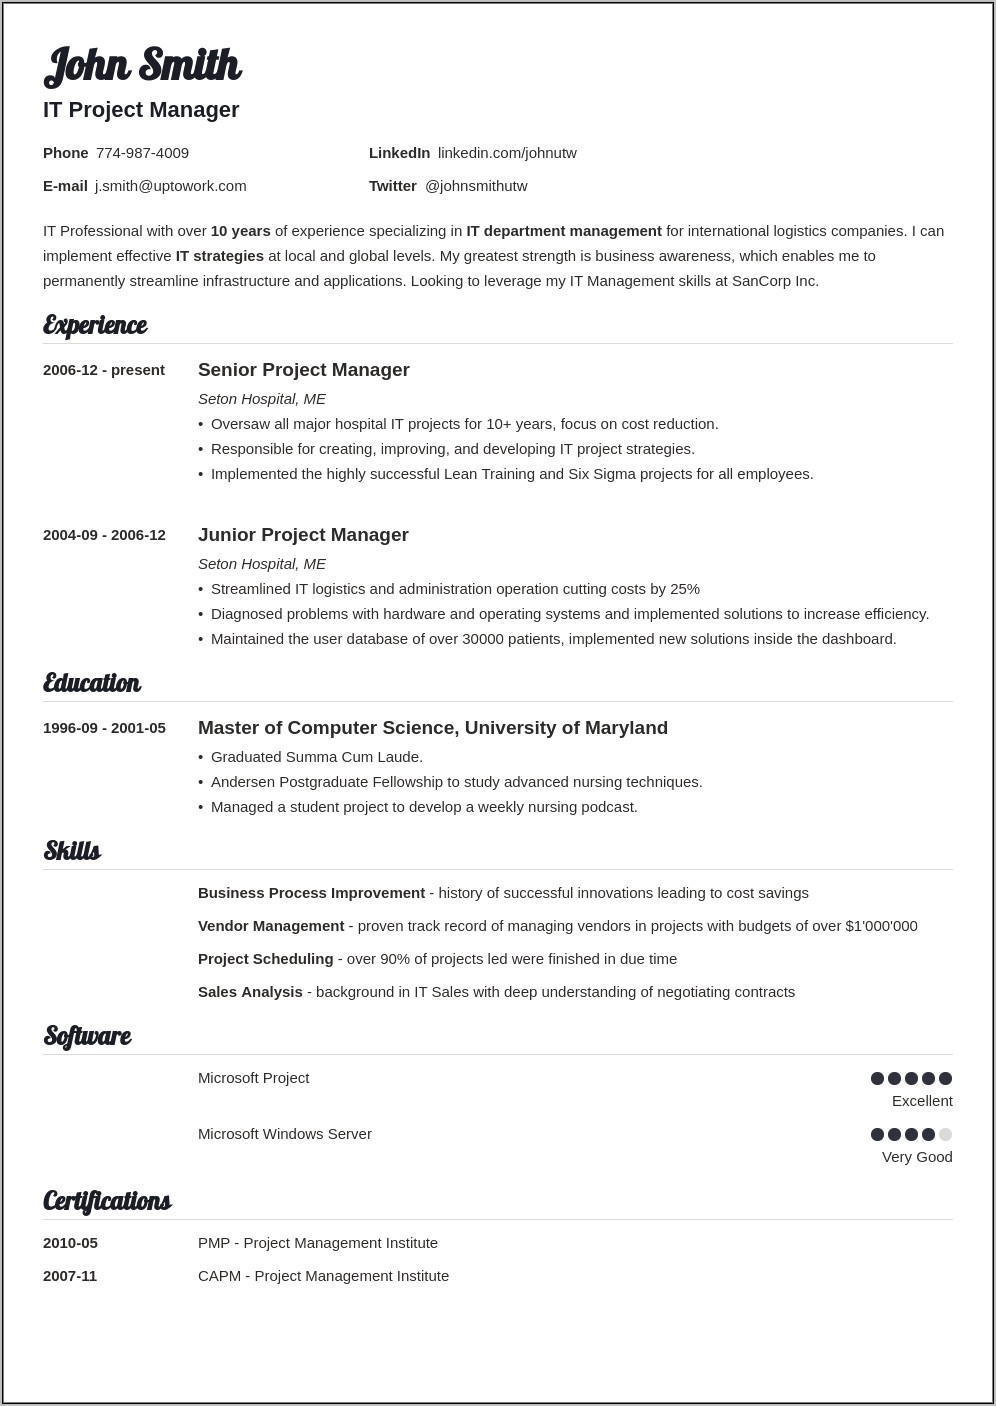 Basic Resume Format In Word Download